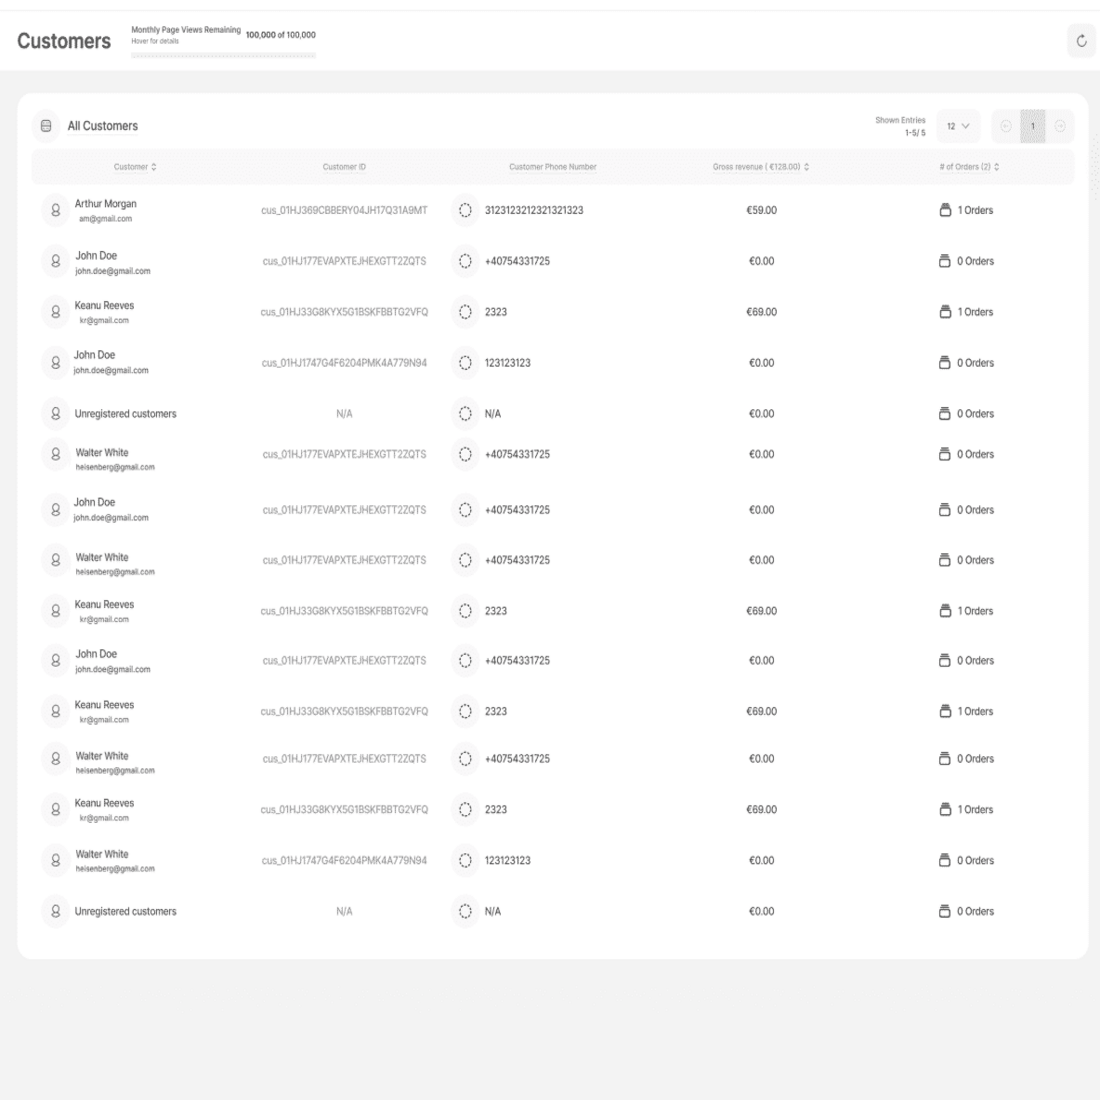 A preview of TWIPLA's customer data hub